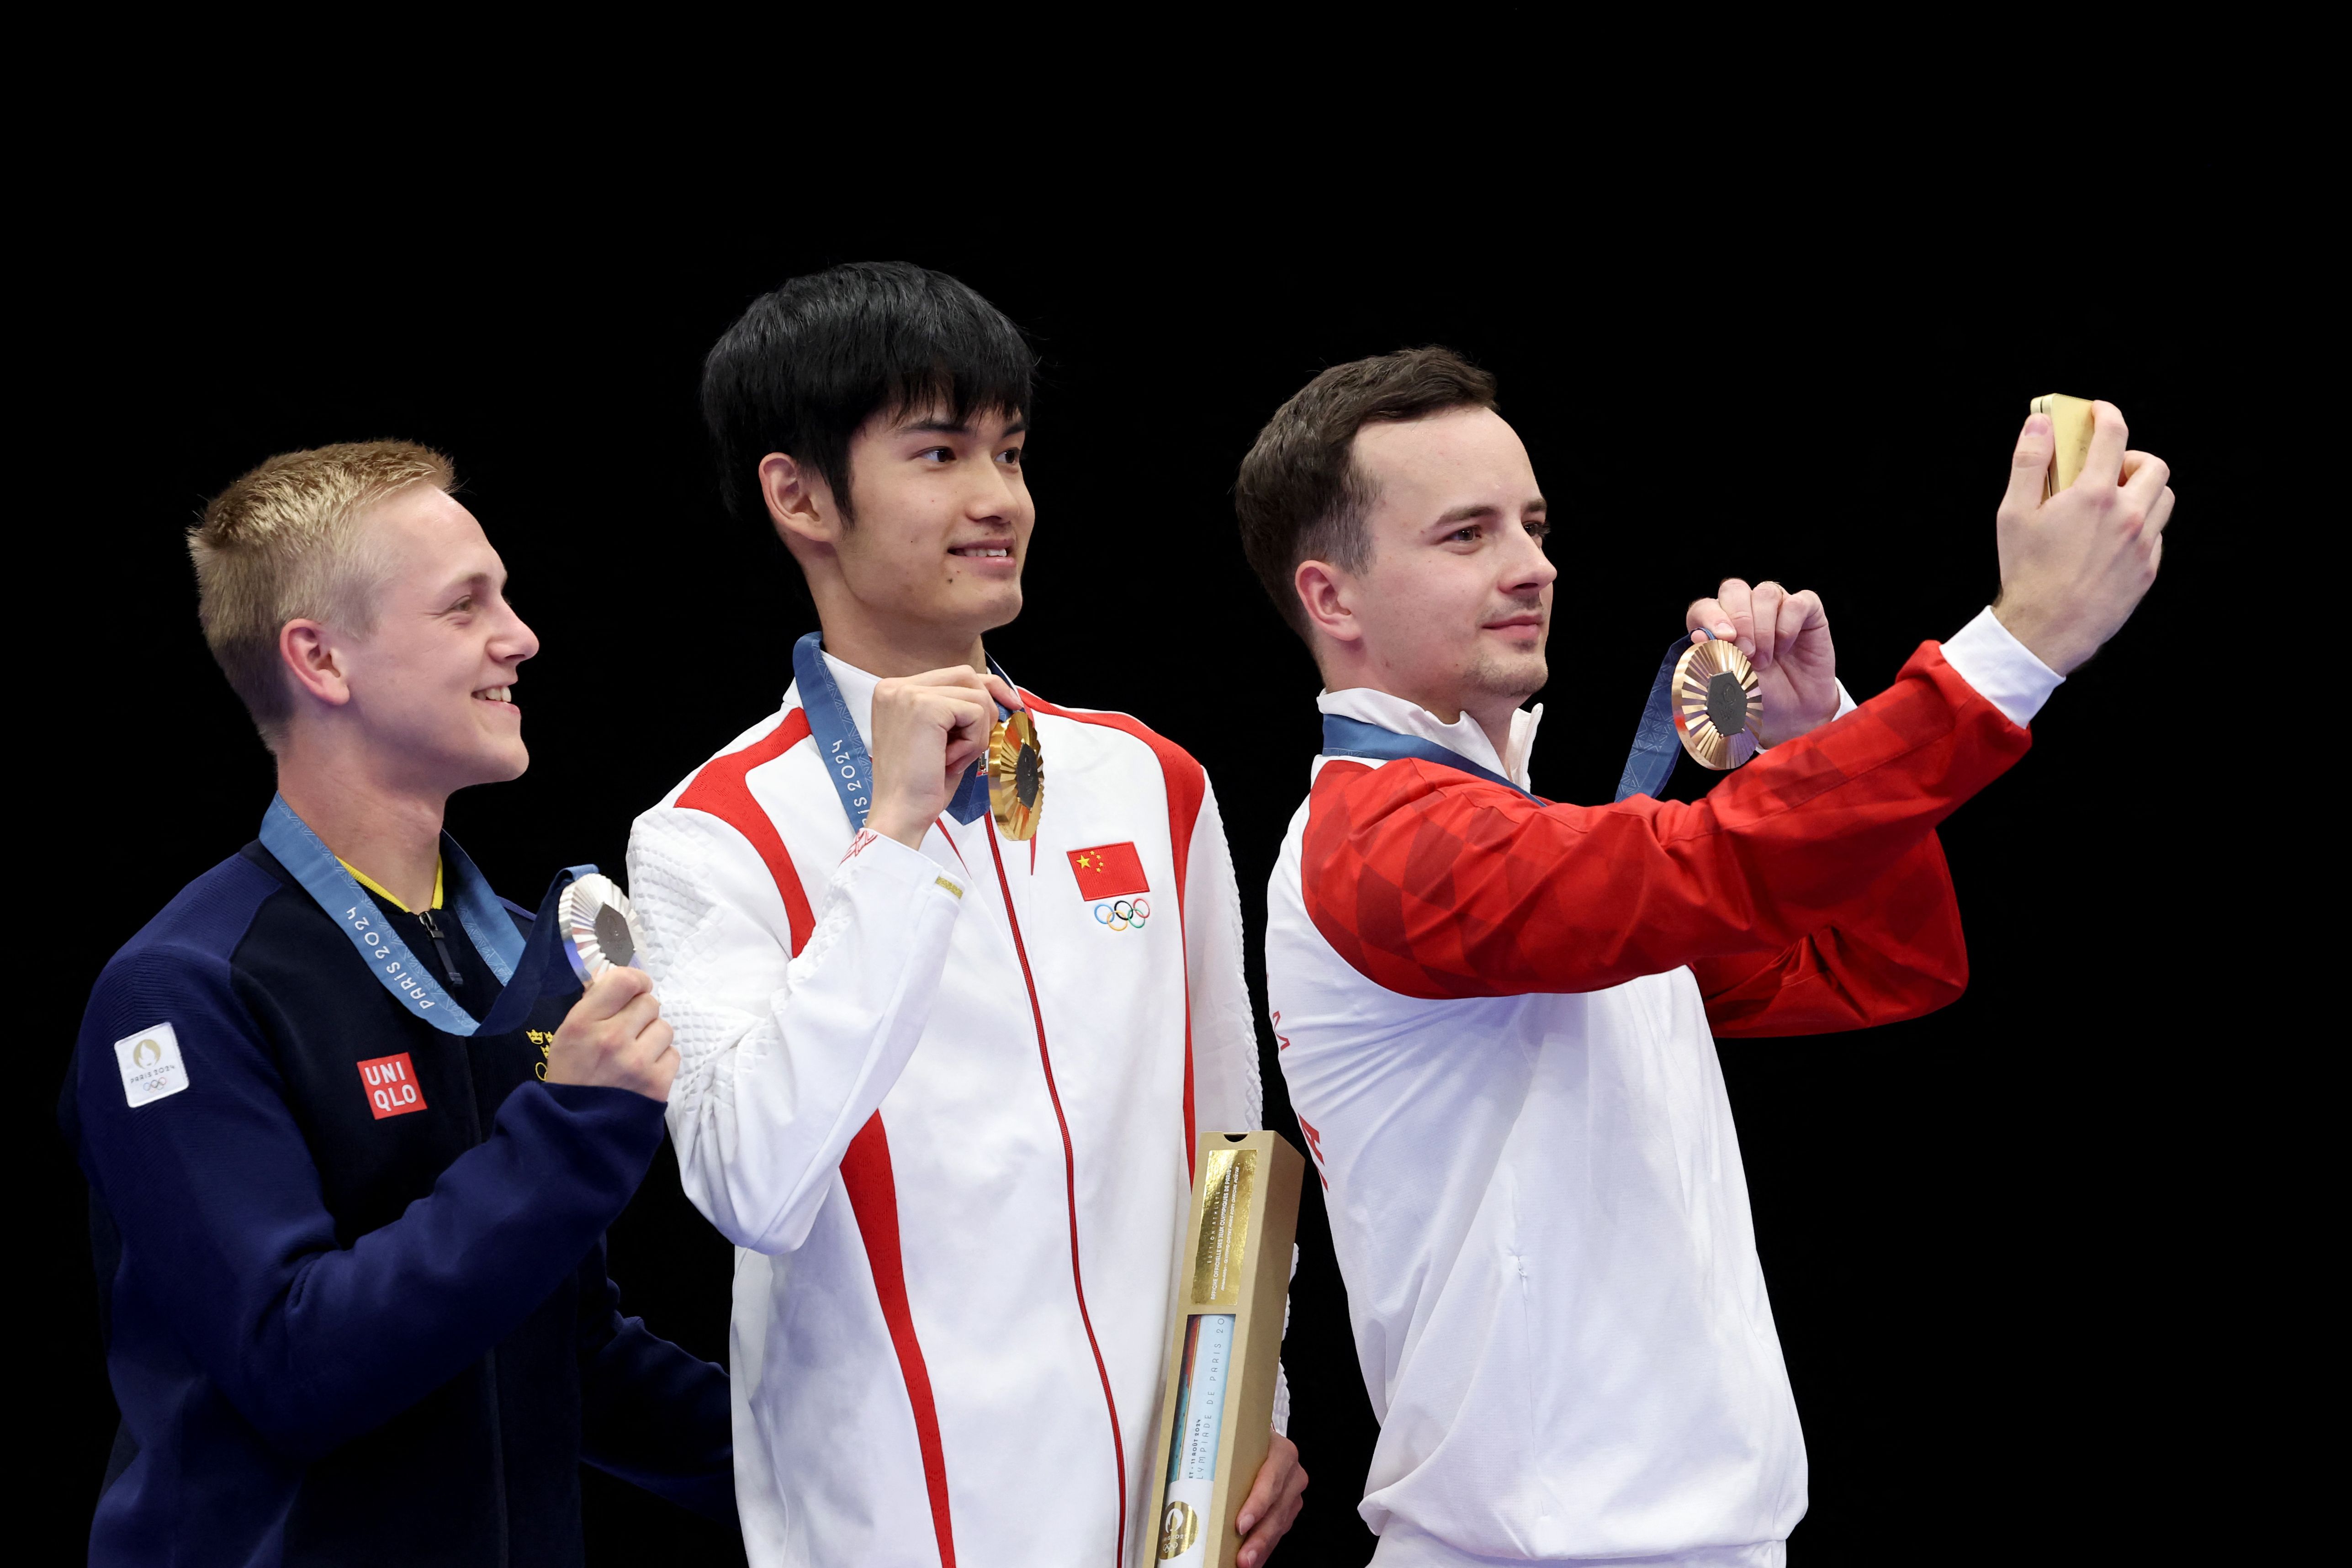 (FromL) Silver medalist, Sweden's Victor Lindgren, gold medalist China's Sheng Lihao and bronze medalist Croatia's Miran Maricic take a selfie on the podium at the end of the shooting 10m air rifle men's final during the Paris 2024 Olympic Games at Chateauroux Shooting Centre on July 29, 2024. (Photo by ALAIN JOCARD / AFP)